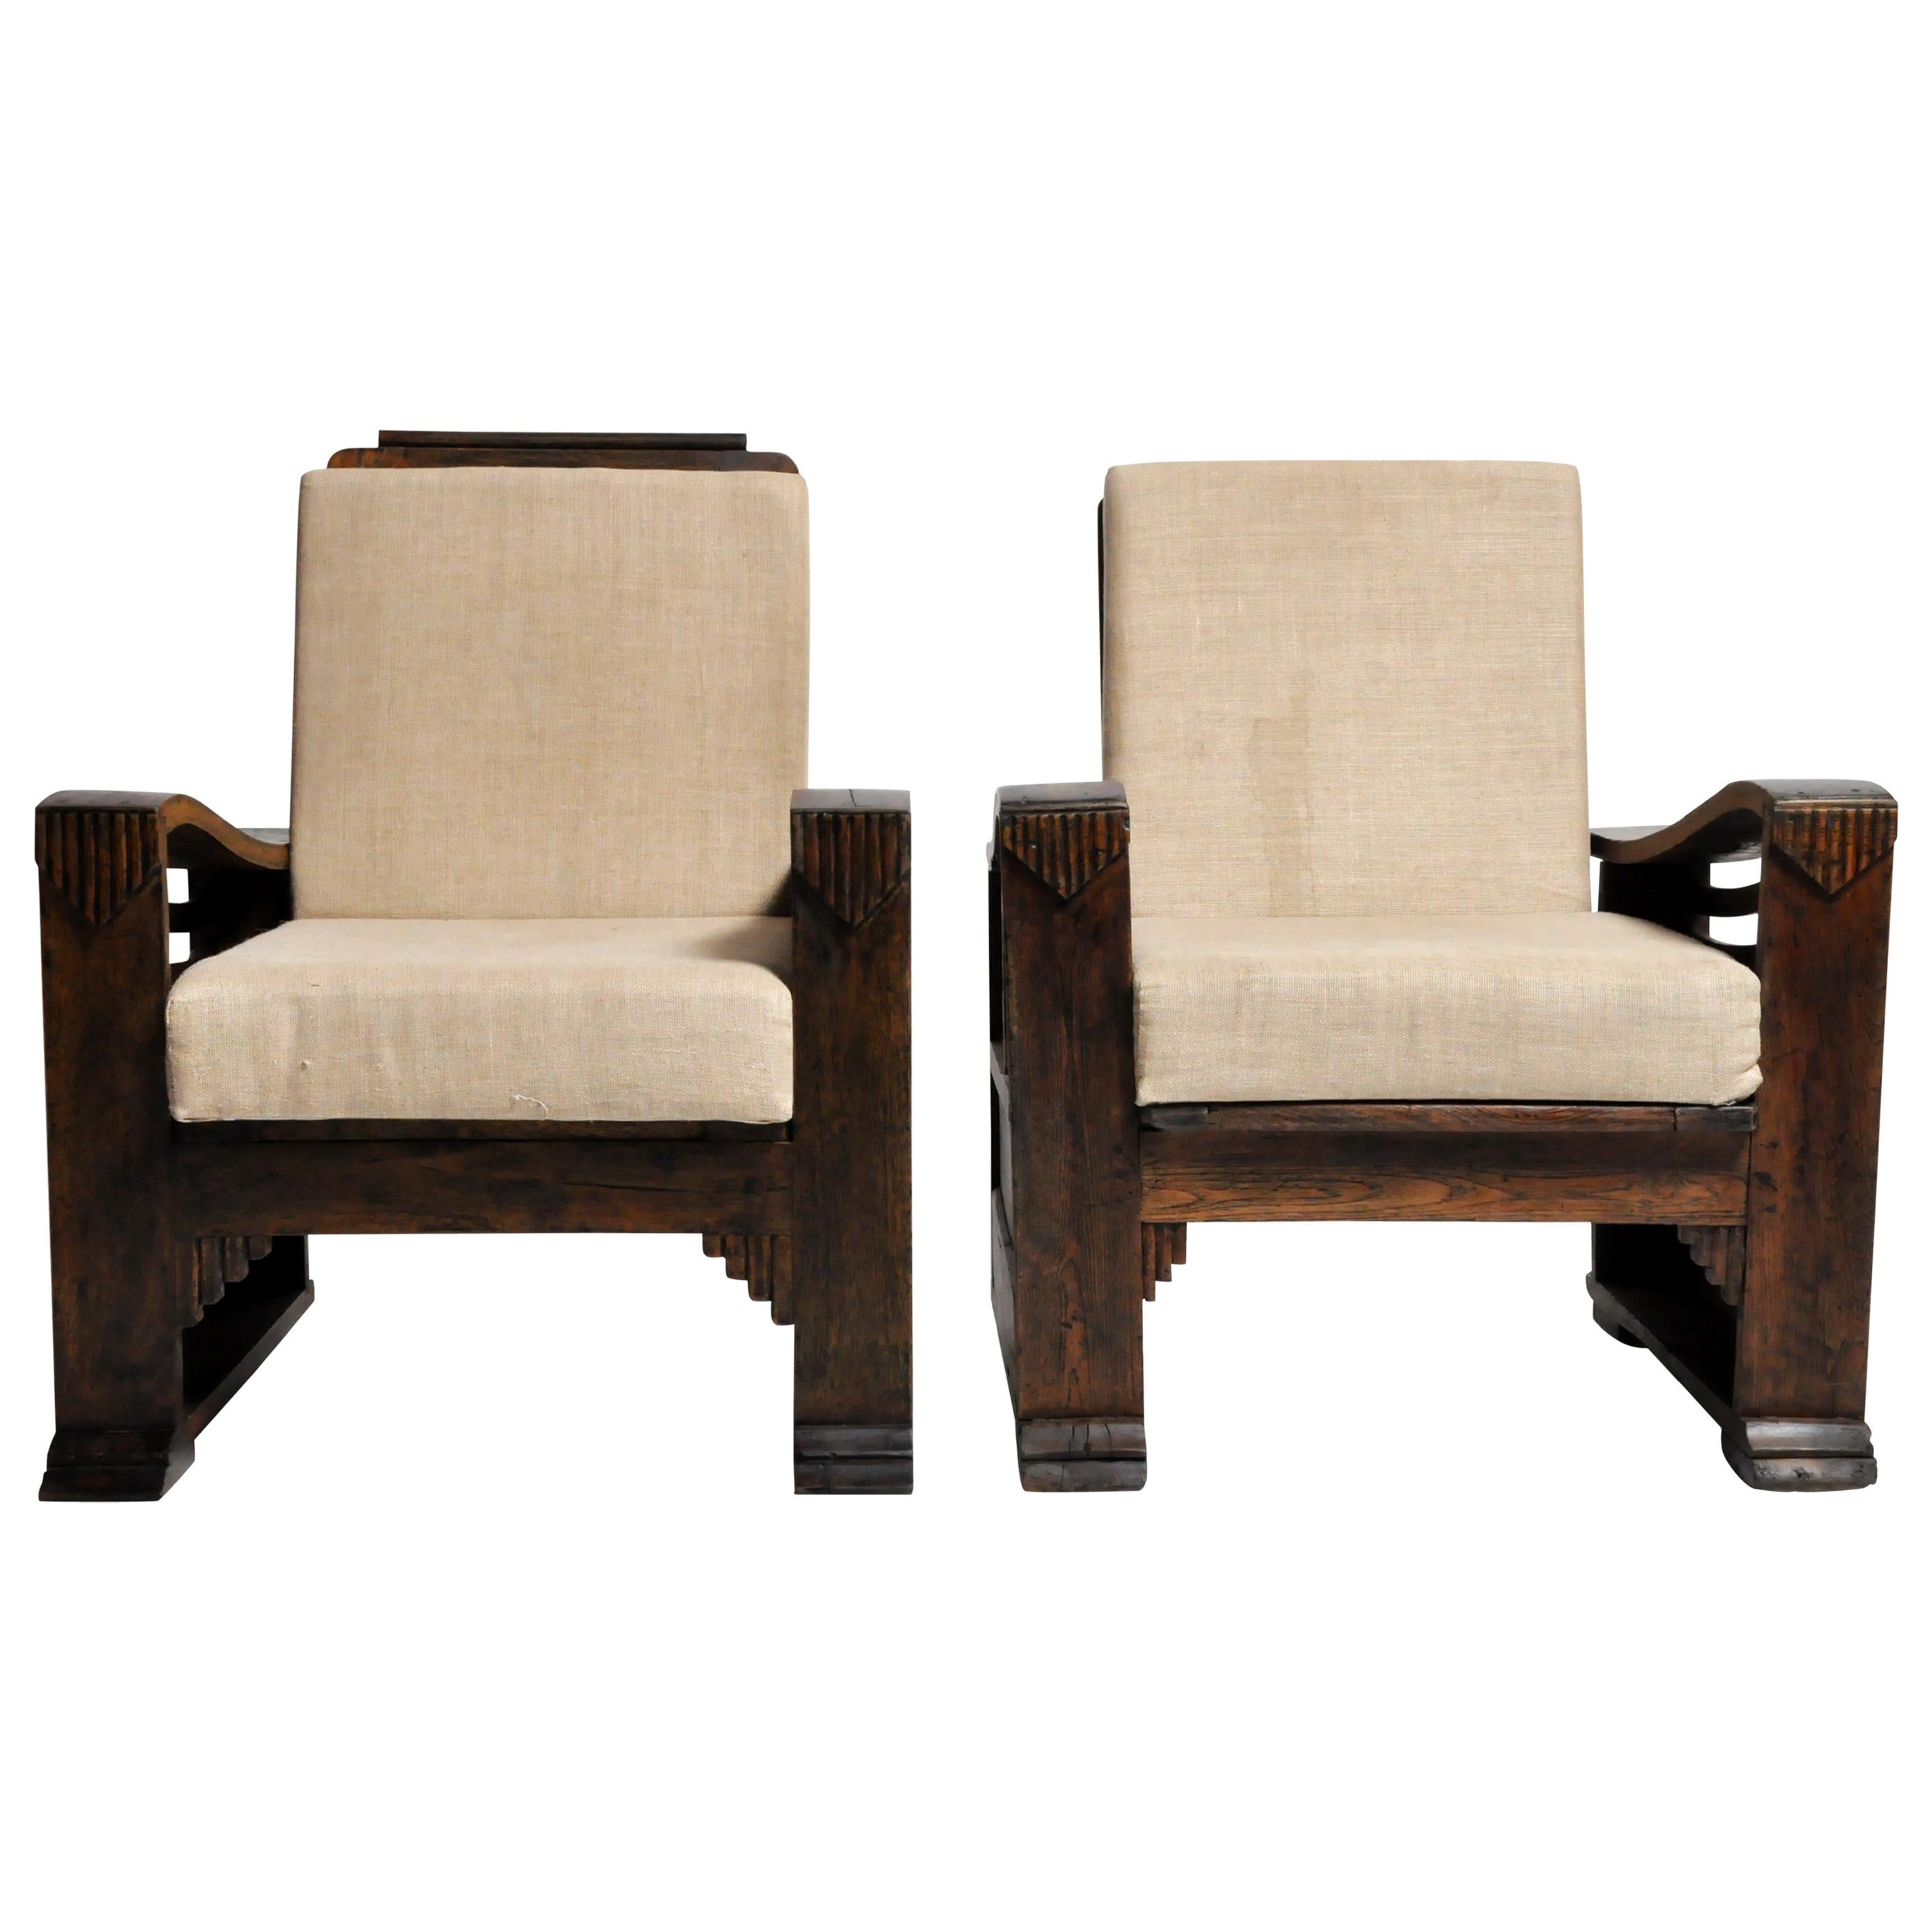 Pair of British Colonial Art Deco Chair